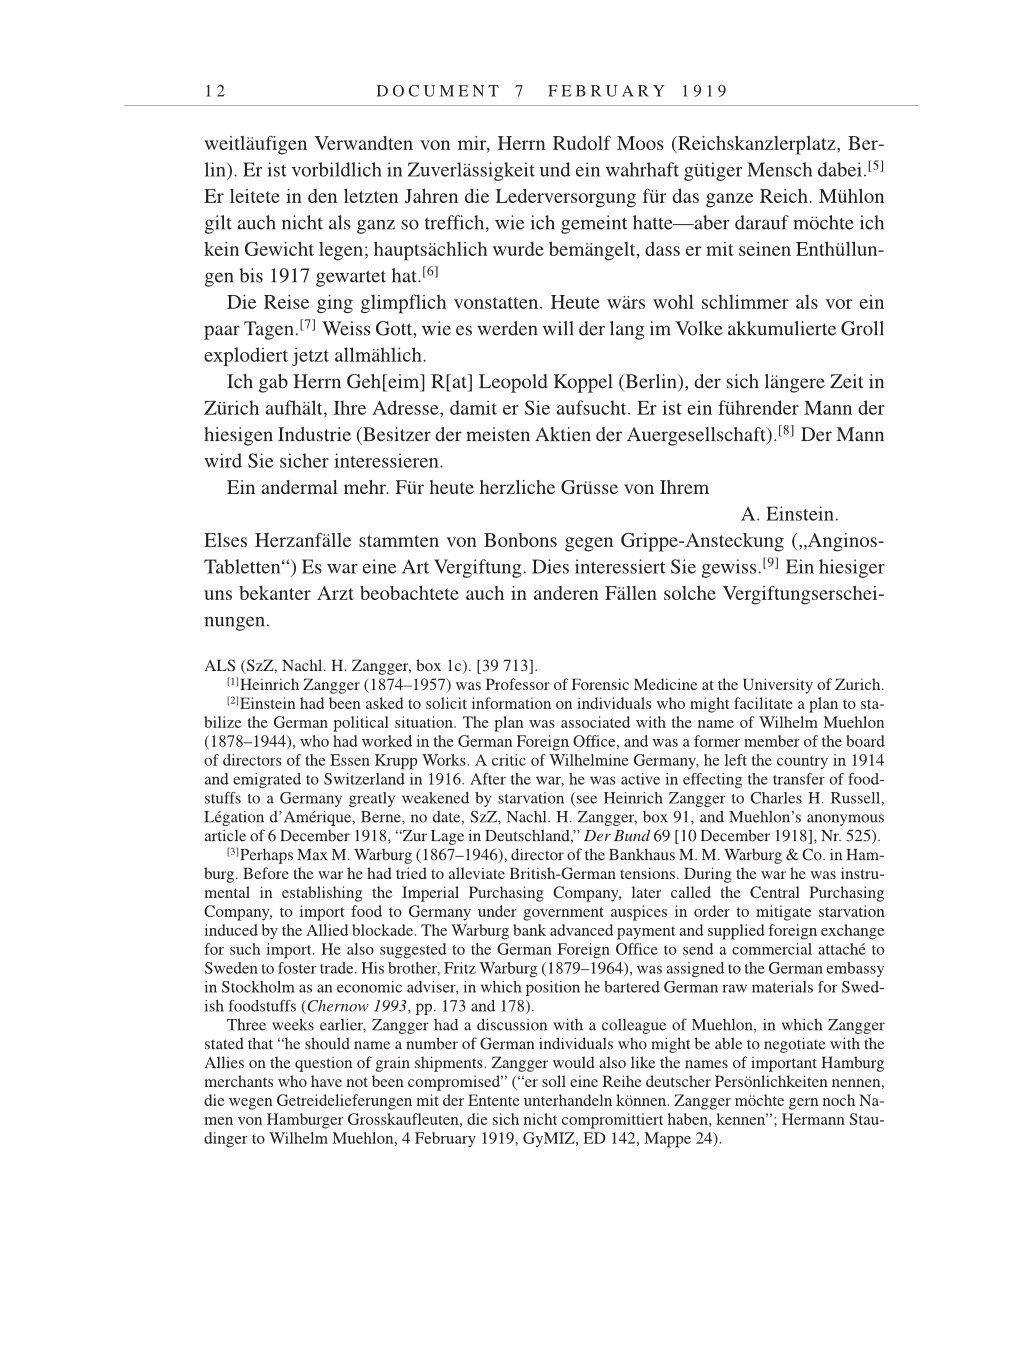 Volume 9: The Berlin Years: Correspondence January 1919-April 1920 page 12